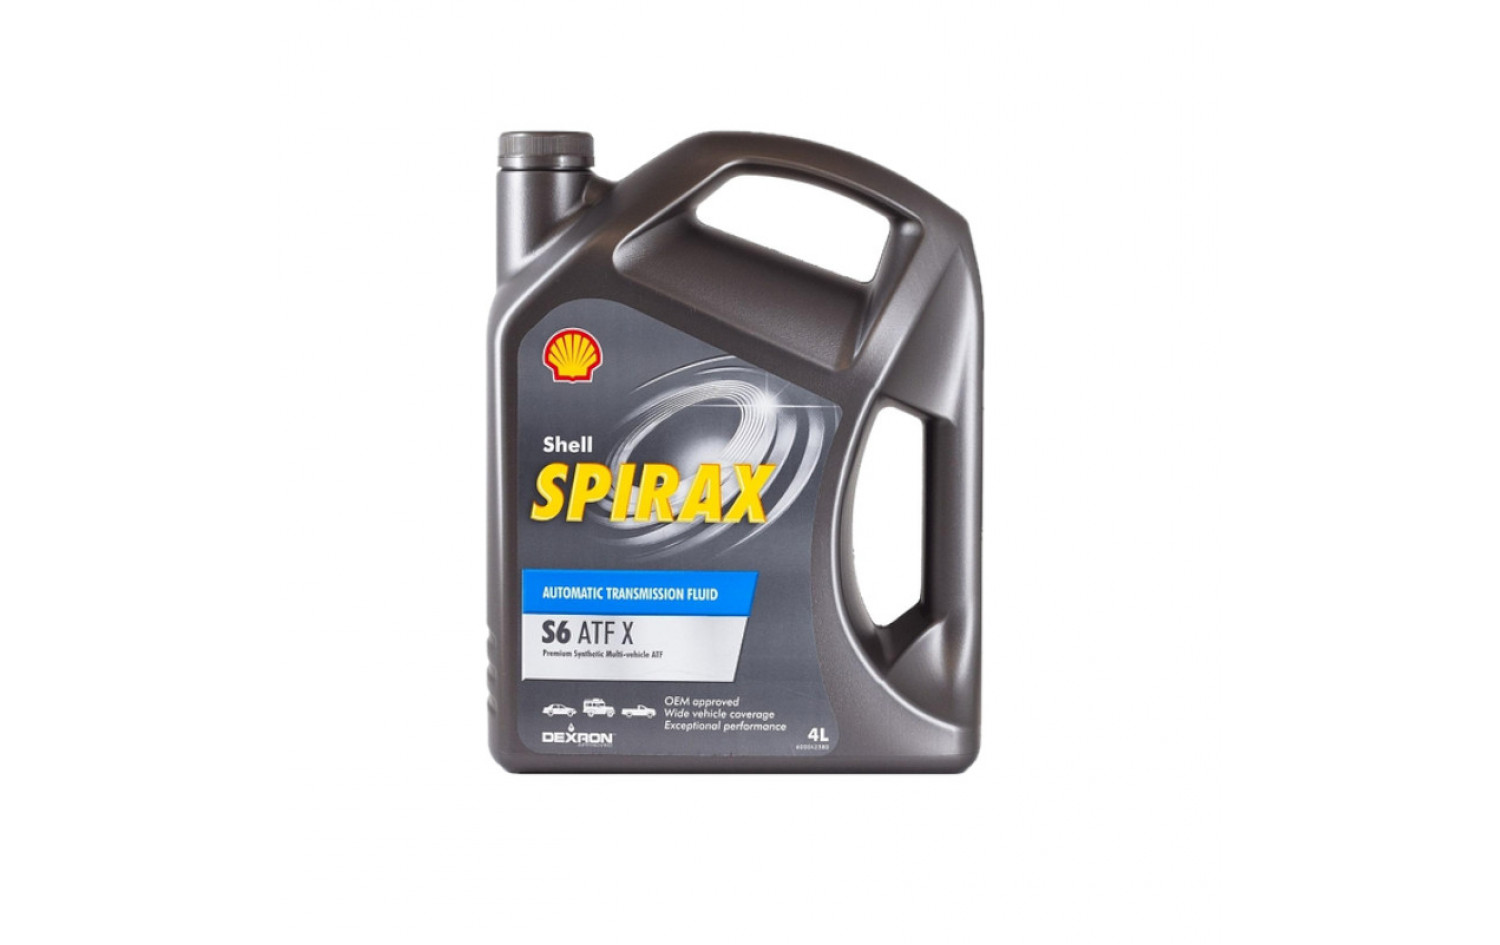 Shell atf x. Масло трансмиссионное Shell Spirax s6 ATF X 4 Л 550048808. Shell Spirax s6 ATF X 4л. 550048808 - Shell Spirax s6 ATF X 4l. Трансмиссионное масло Shell Spirax s6 ATF X 4l.